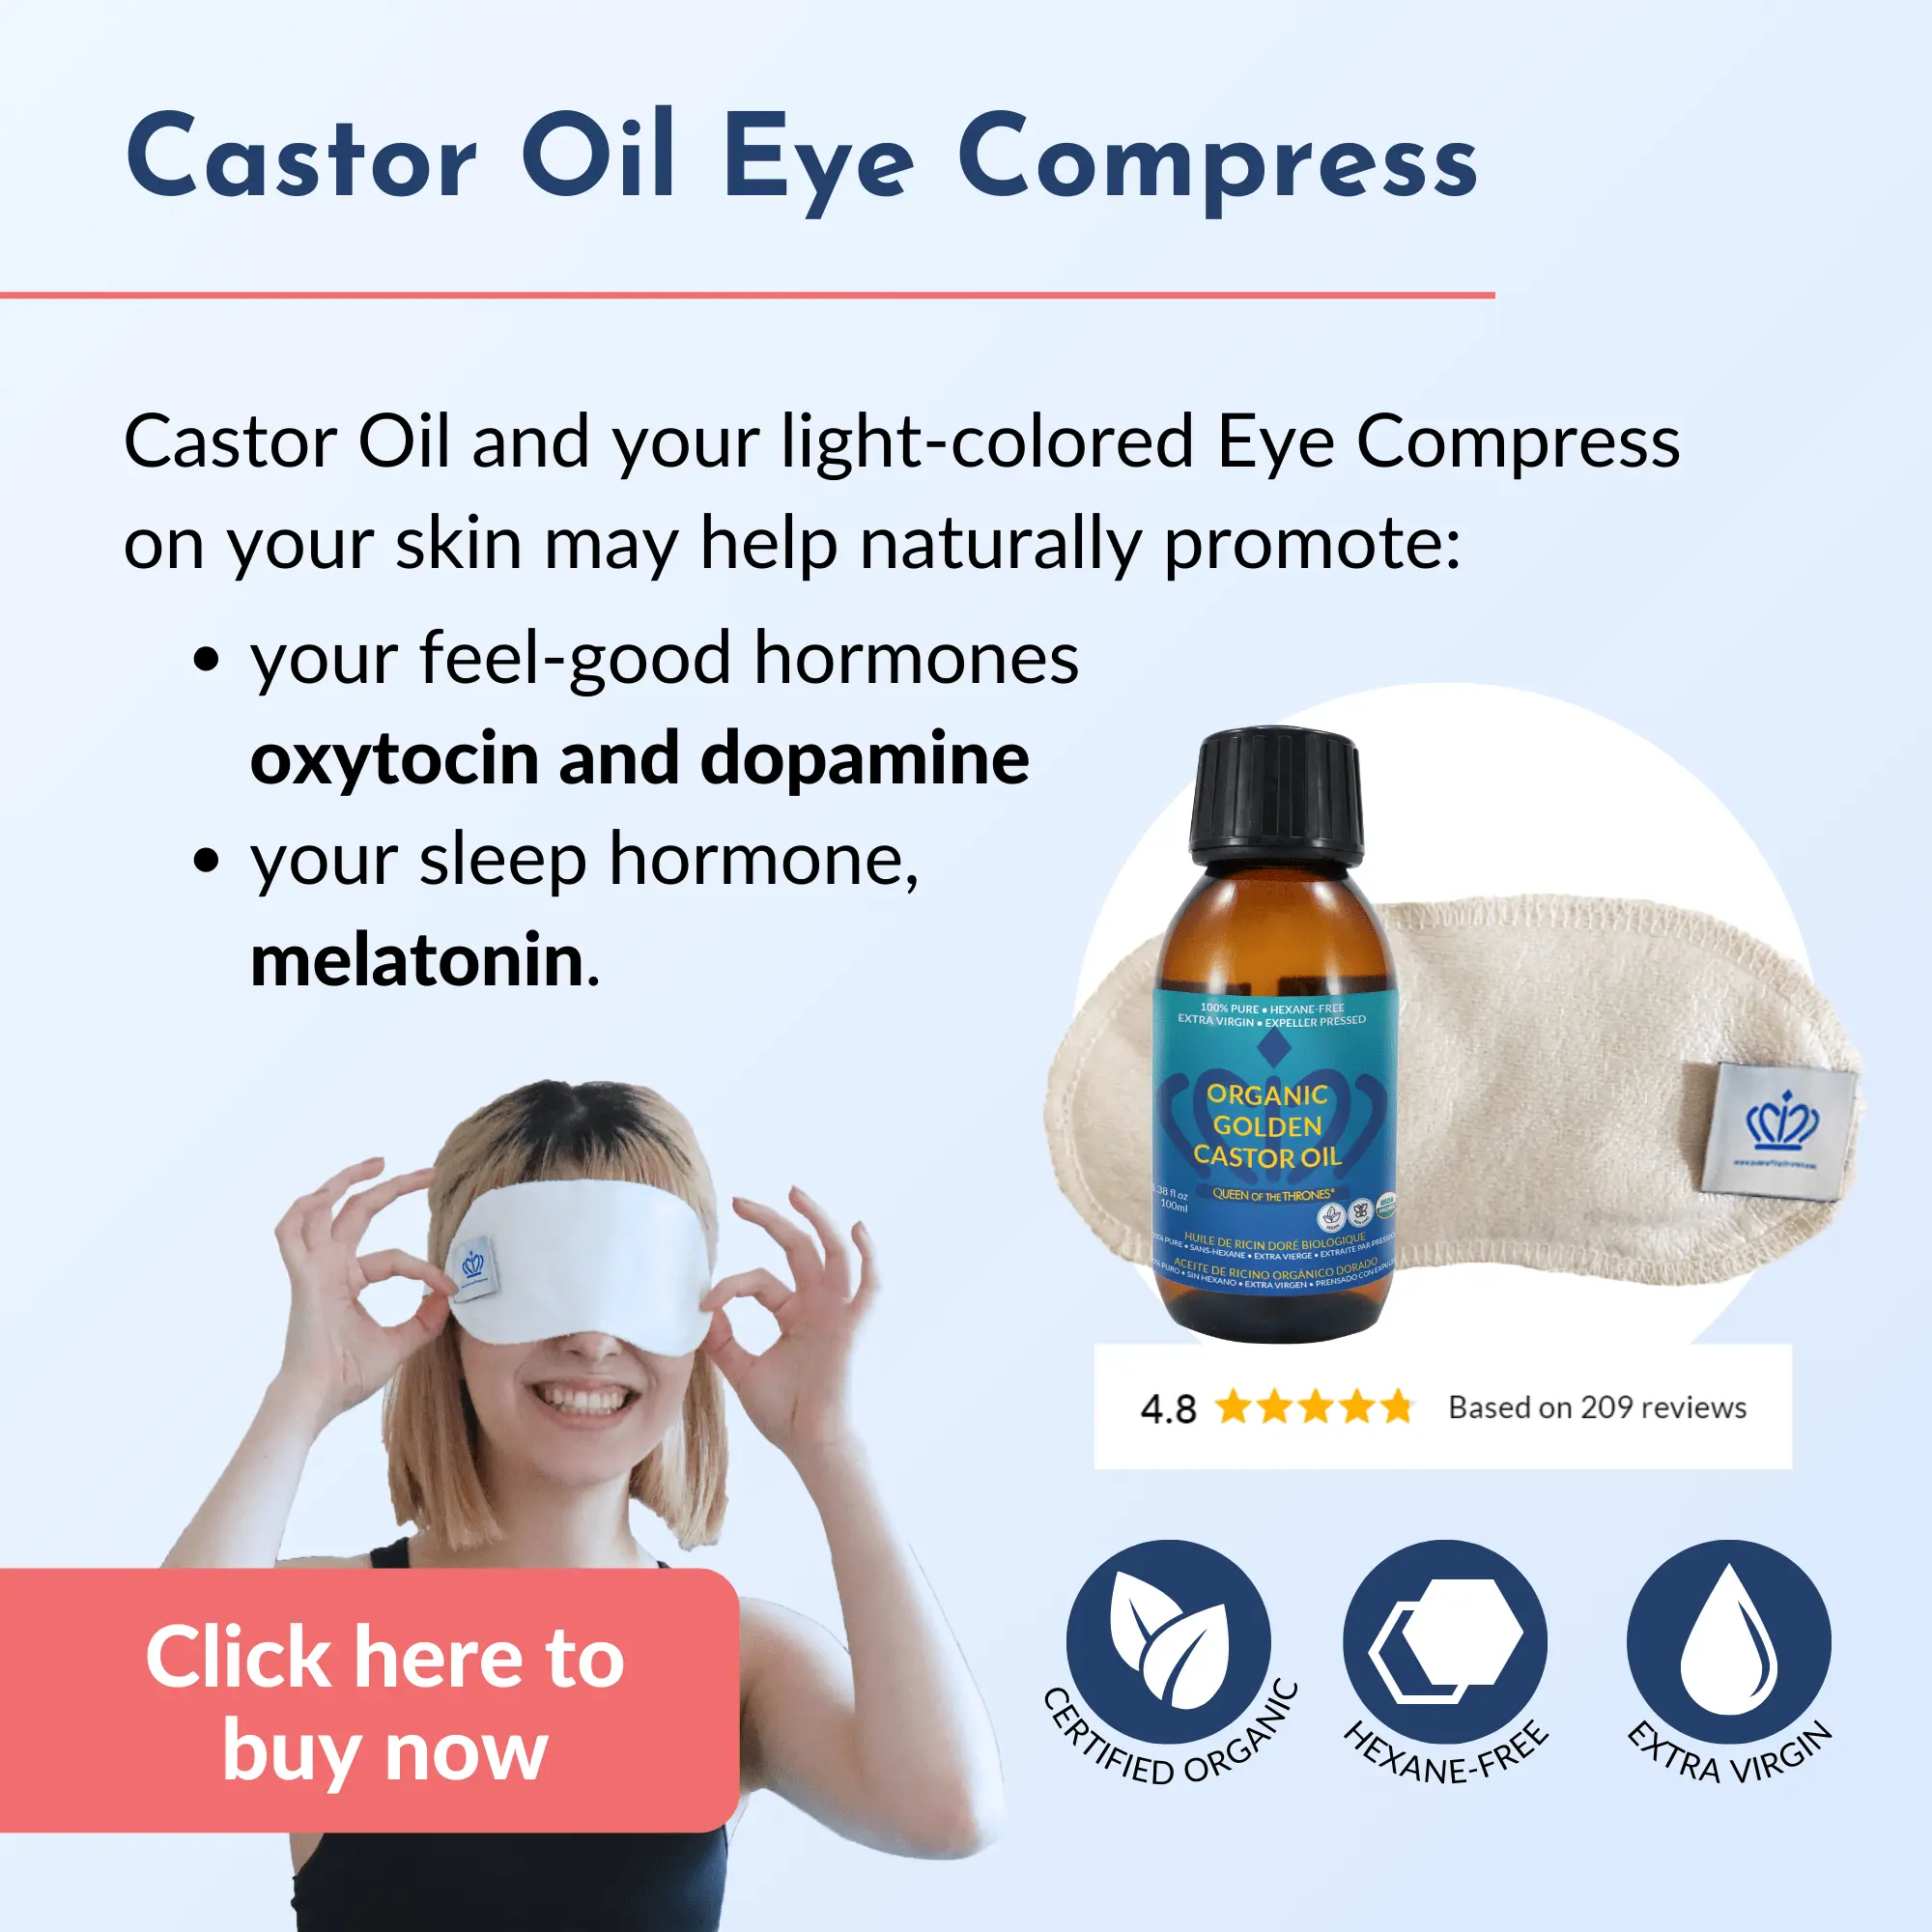 Queen-of-the-Thrones Castor Oil eye compress promotion 